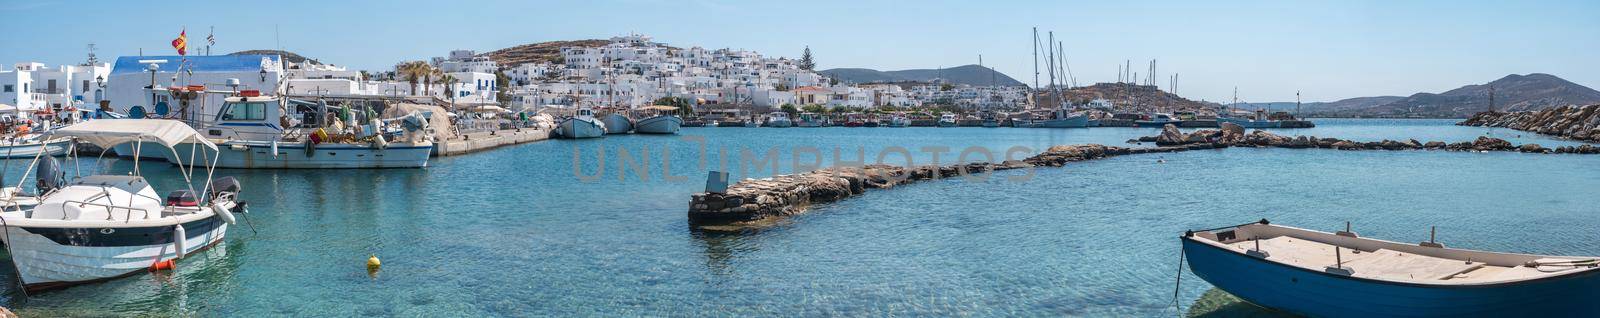 Panorama view of old boats moored in Mykonos harbor and typical white houses on the hill on background